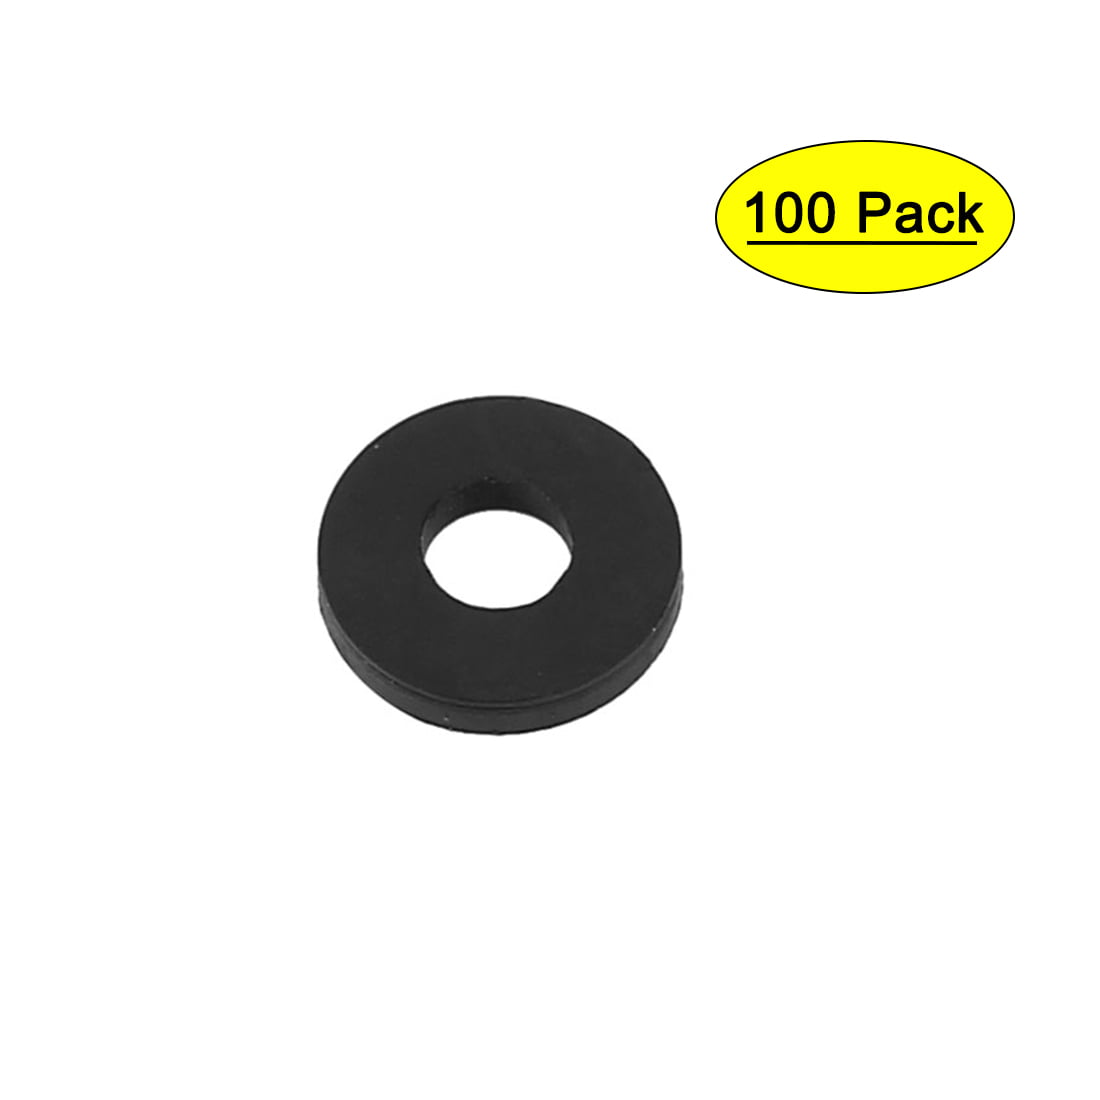 12mm OD O-Ring O-Ring Flat Rubber Washer Lot for Eyelet tap 100 Pieces